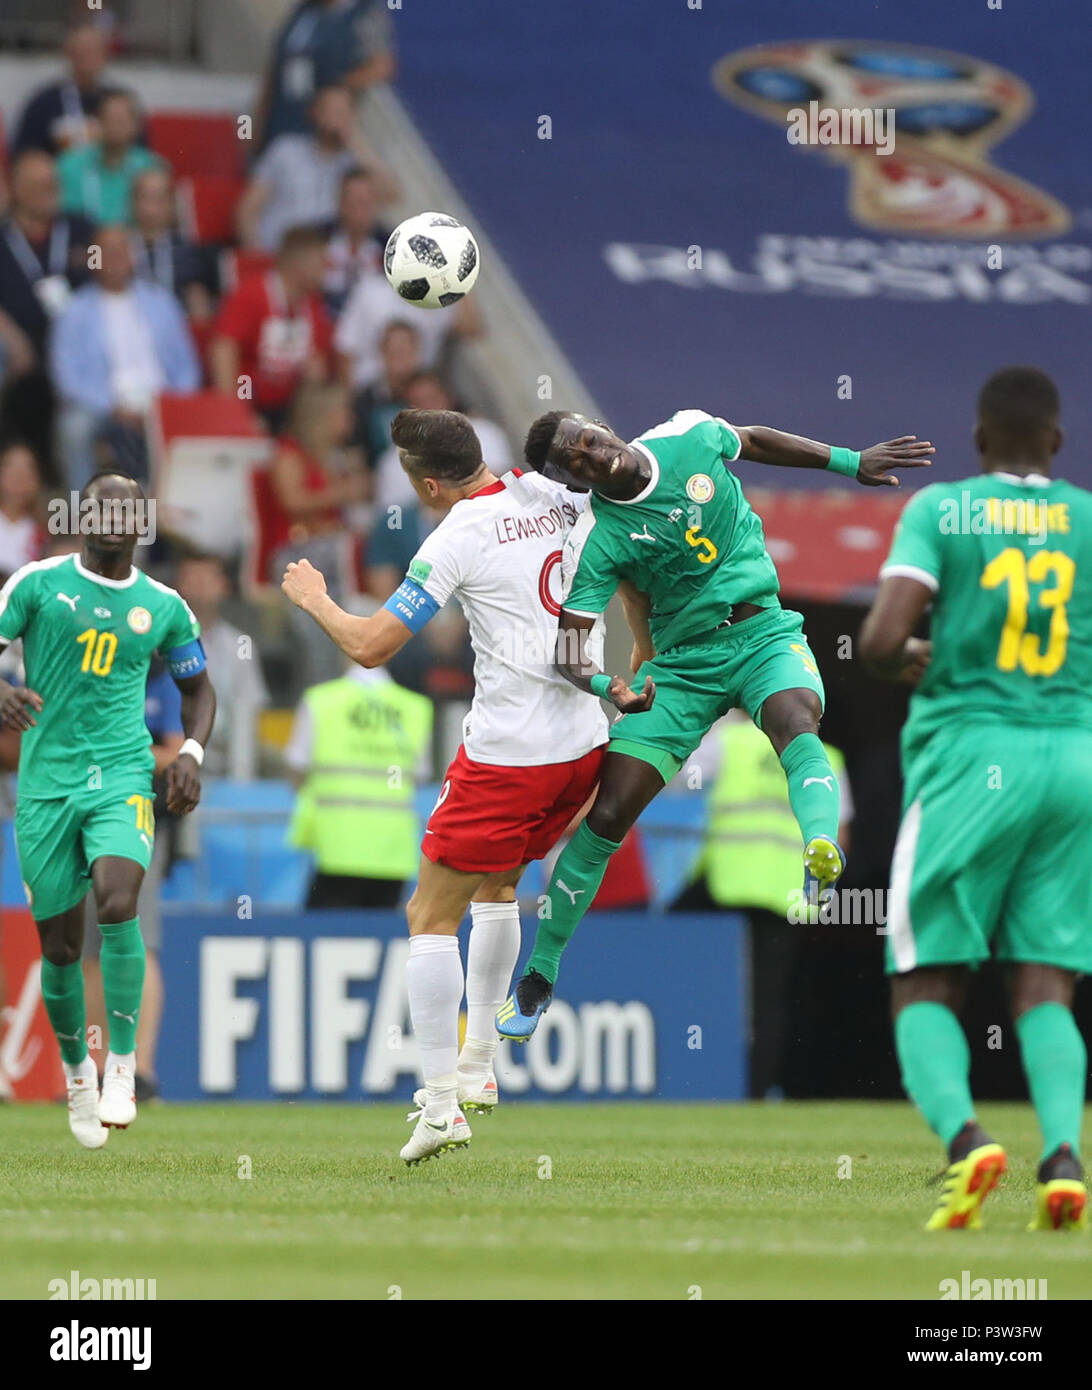 Moscow, Russia. 19th June, 2018. Idrissa Gana Gueye (2nd R) of Senegal competes for a header with Robert Lewandowski (2nd L) of Poland during a Group H match between Poland and Senegal at the 2018 FIFA World Cup in Moscow, Russia, June 19, 2018. Senegal won 2-1. Credit: Fei Maohua/Xinhua/Alamy Live News Stock Photo